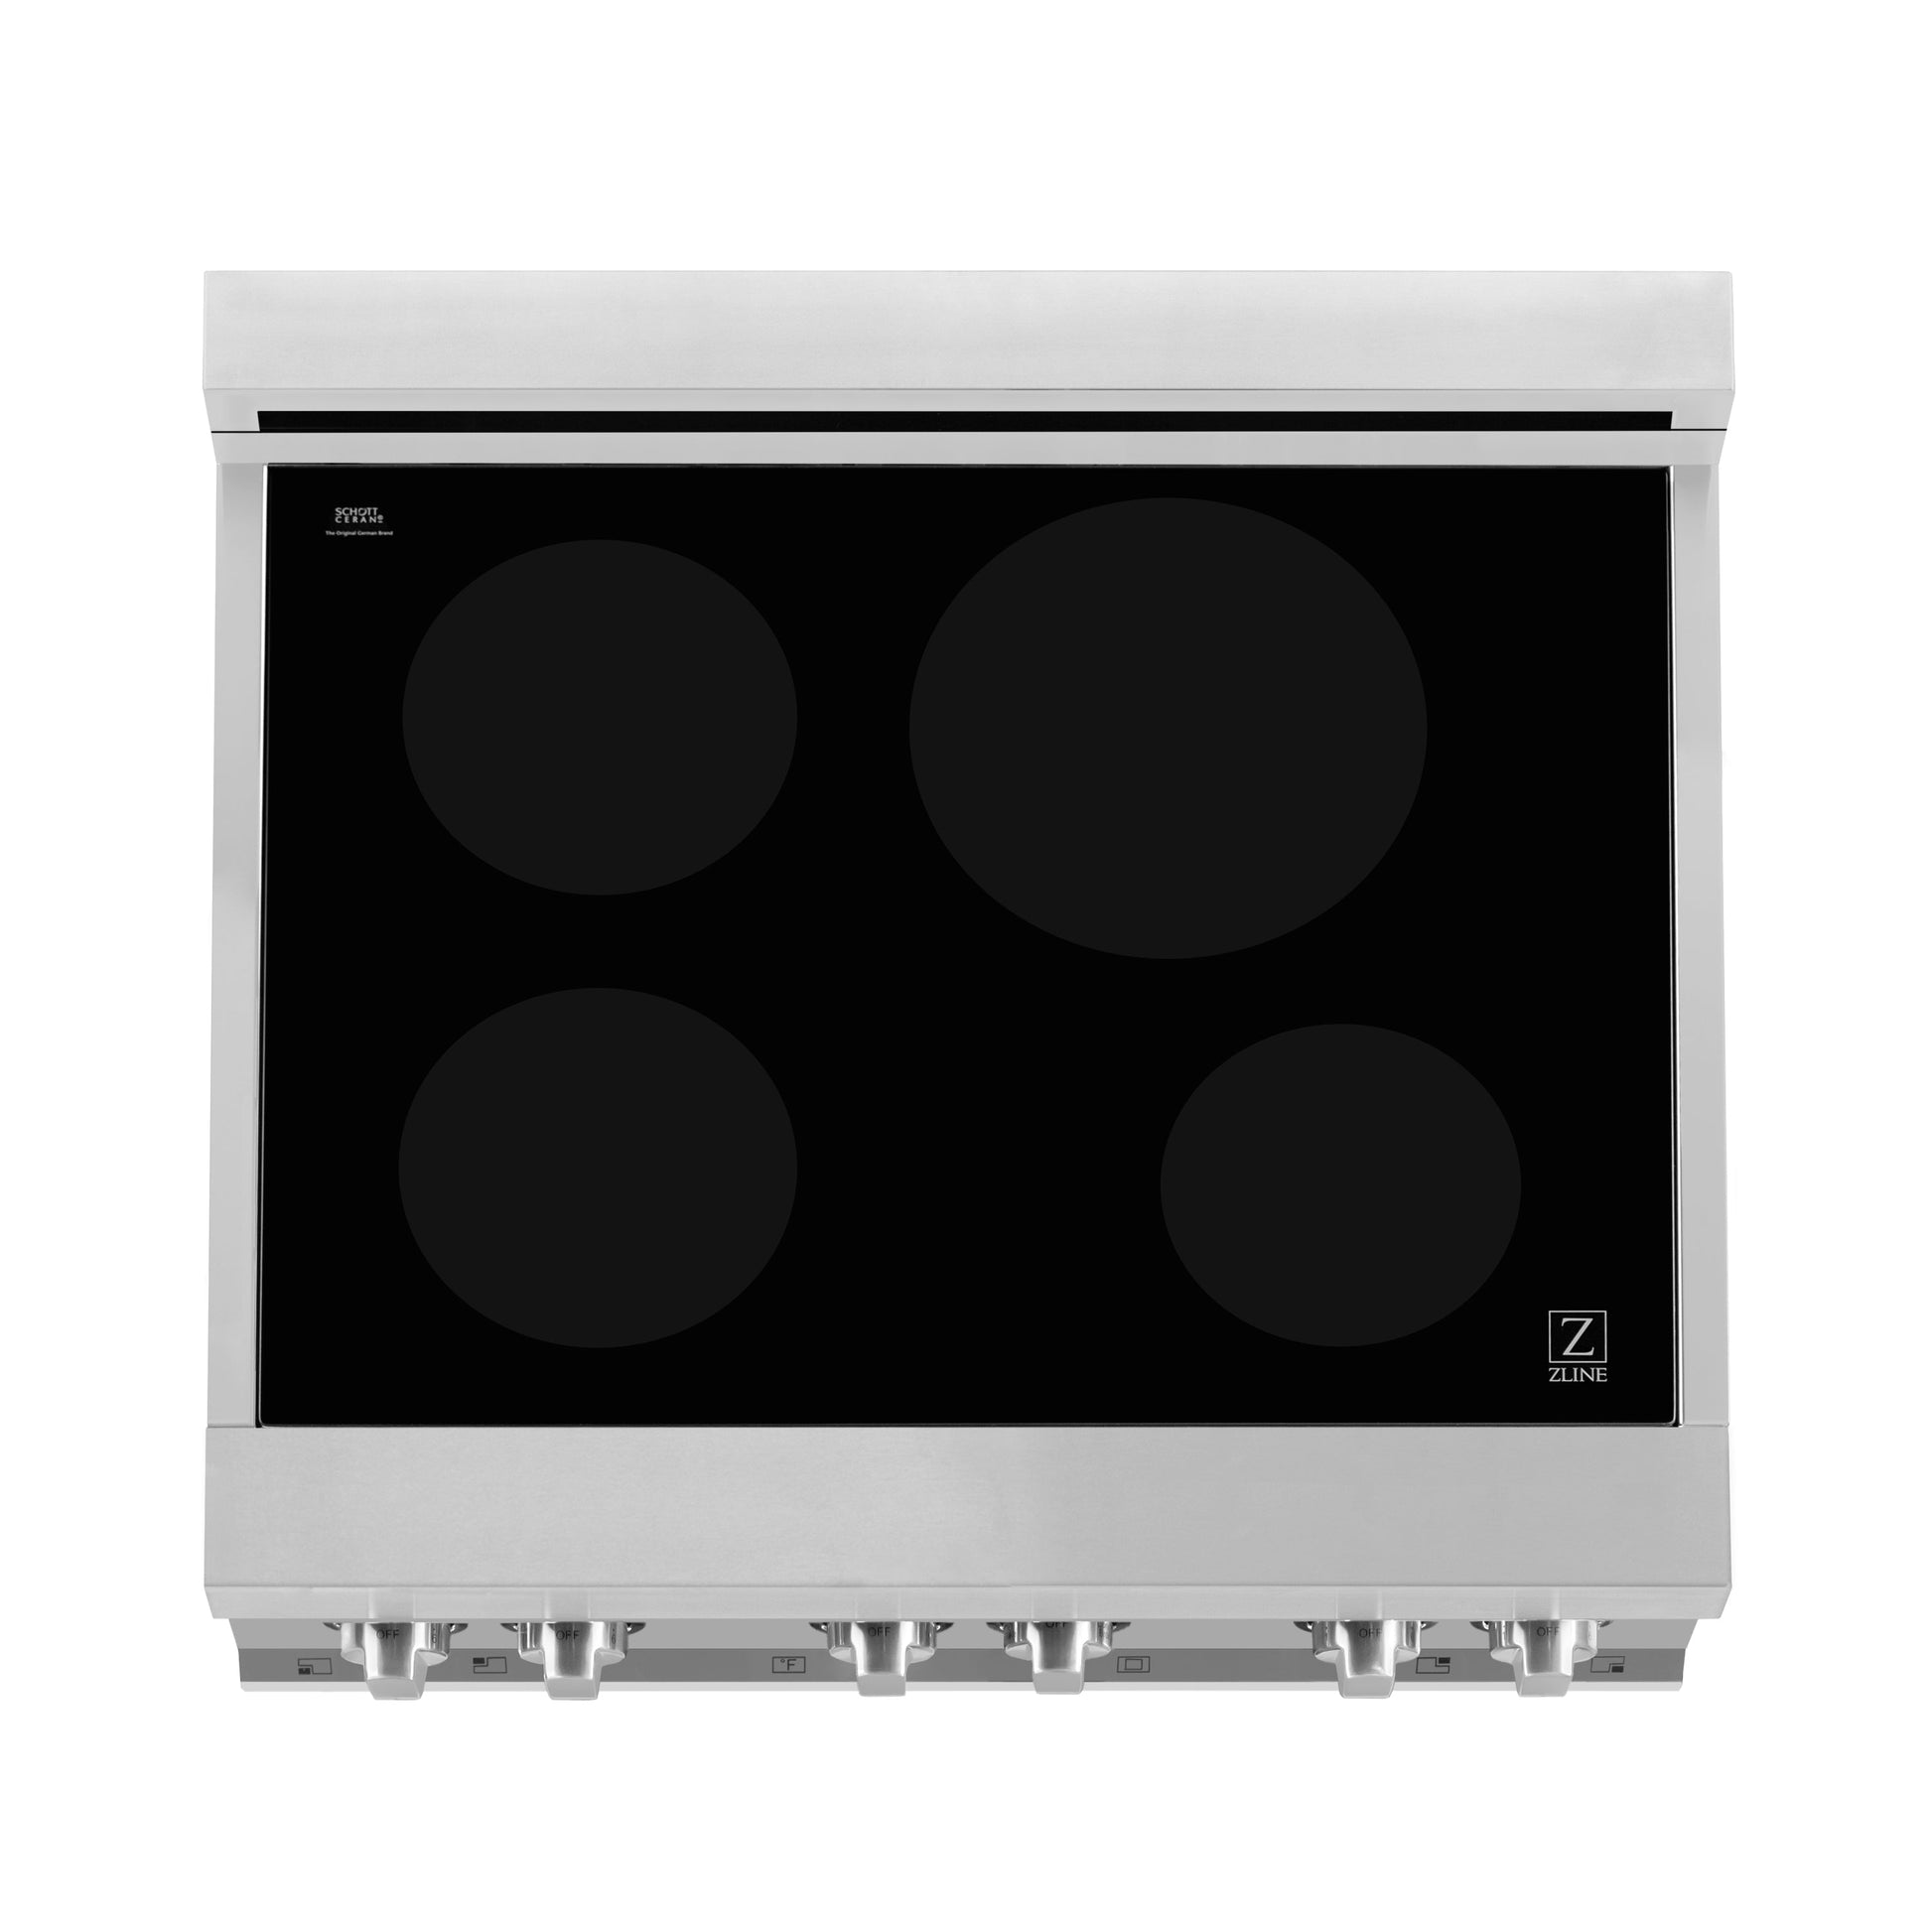 ZLINE 30 in. 4.0 cu. ft. Induction Range with a 4 Induction Element Stove and Electric Oven in Stainless Steel (RAIND-30) from above showing induction cooking elements on Schott Ceran® glass cooktop.